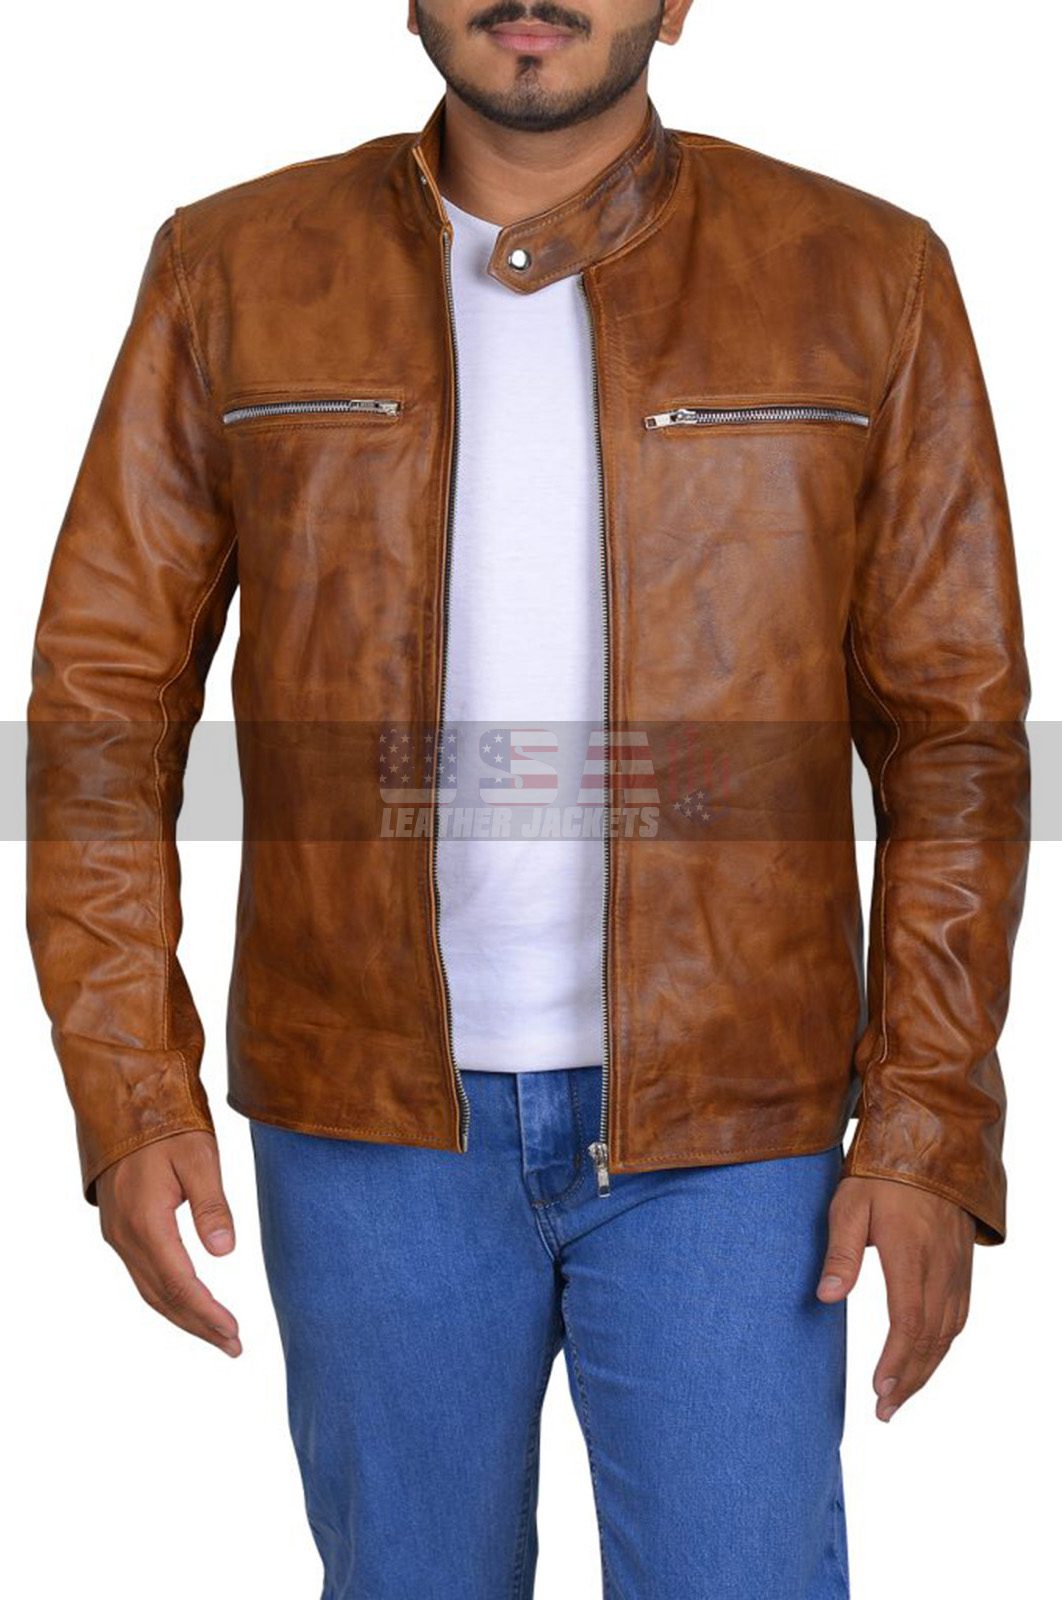 Angus MacGyver Lucas Till Brown Leather Jacket